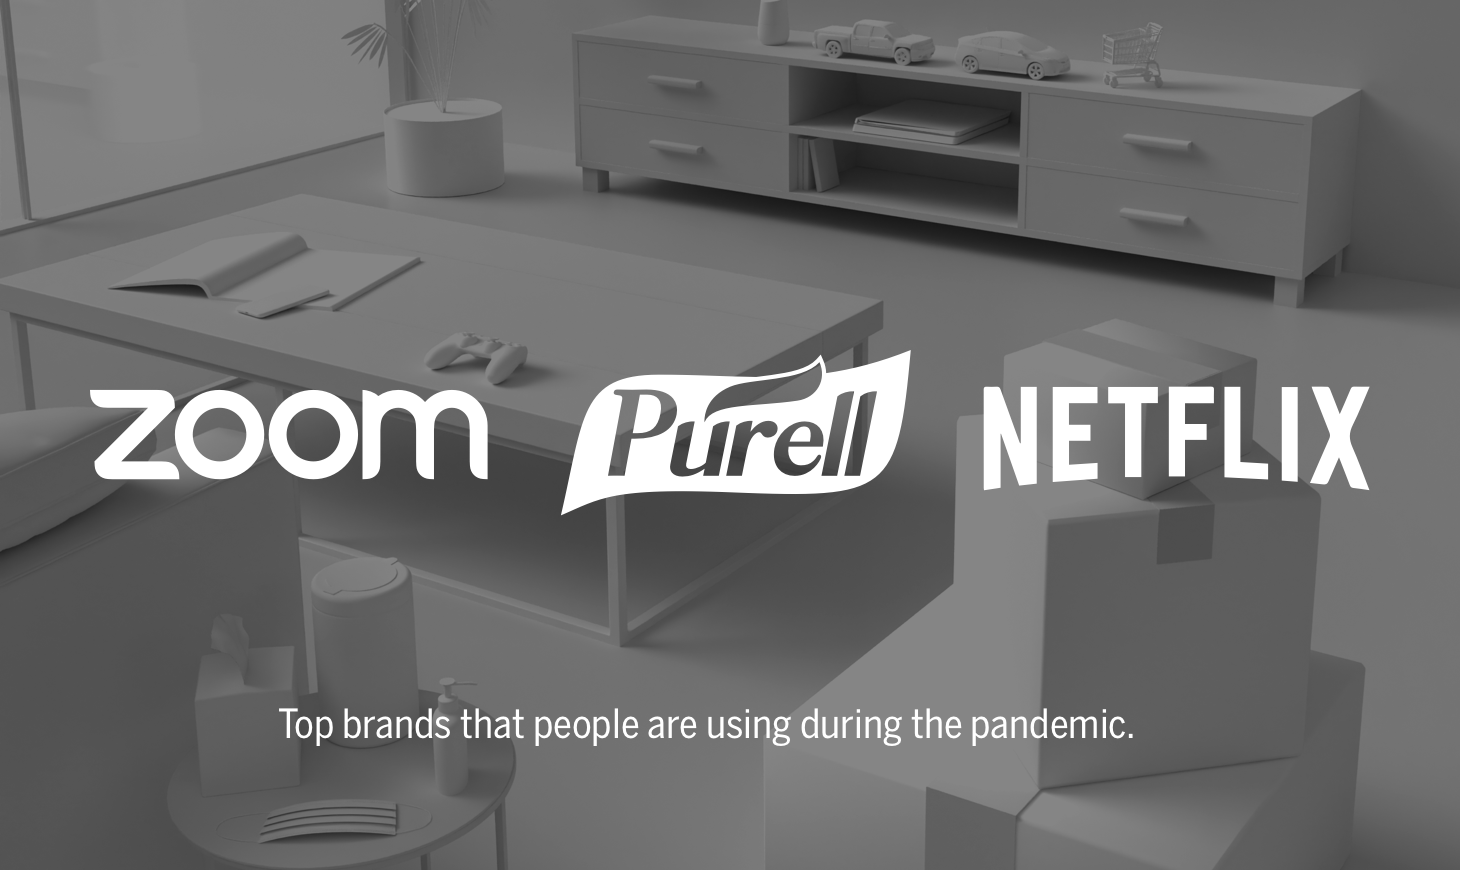 Zoom, Purell and Netflix, Top Brand that People are Using More During the Pandemic